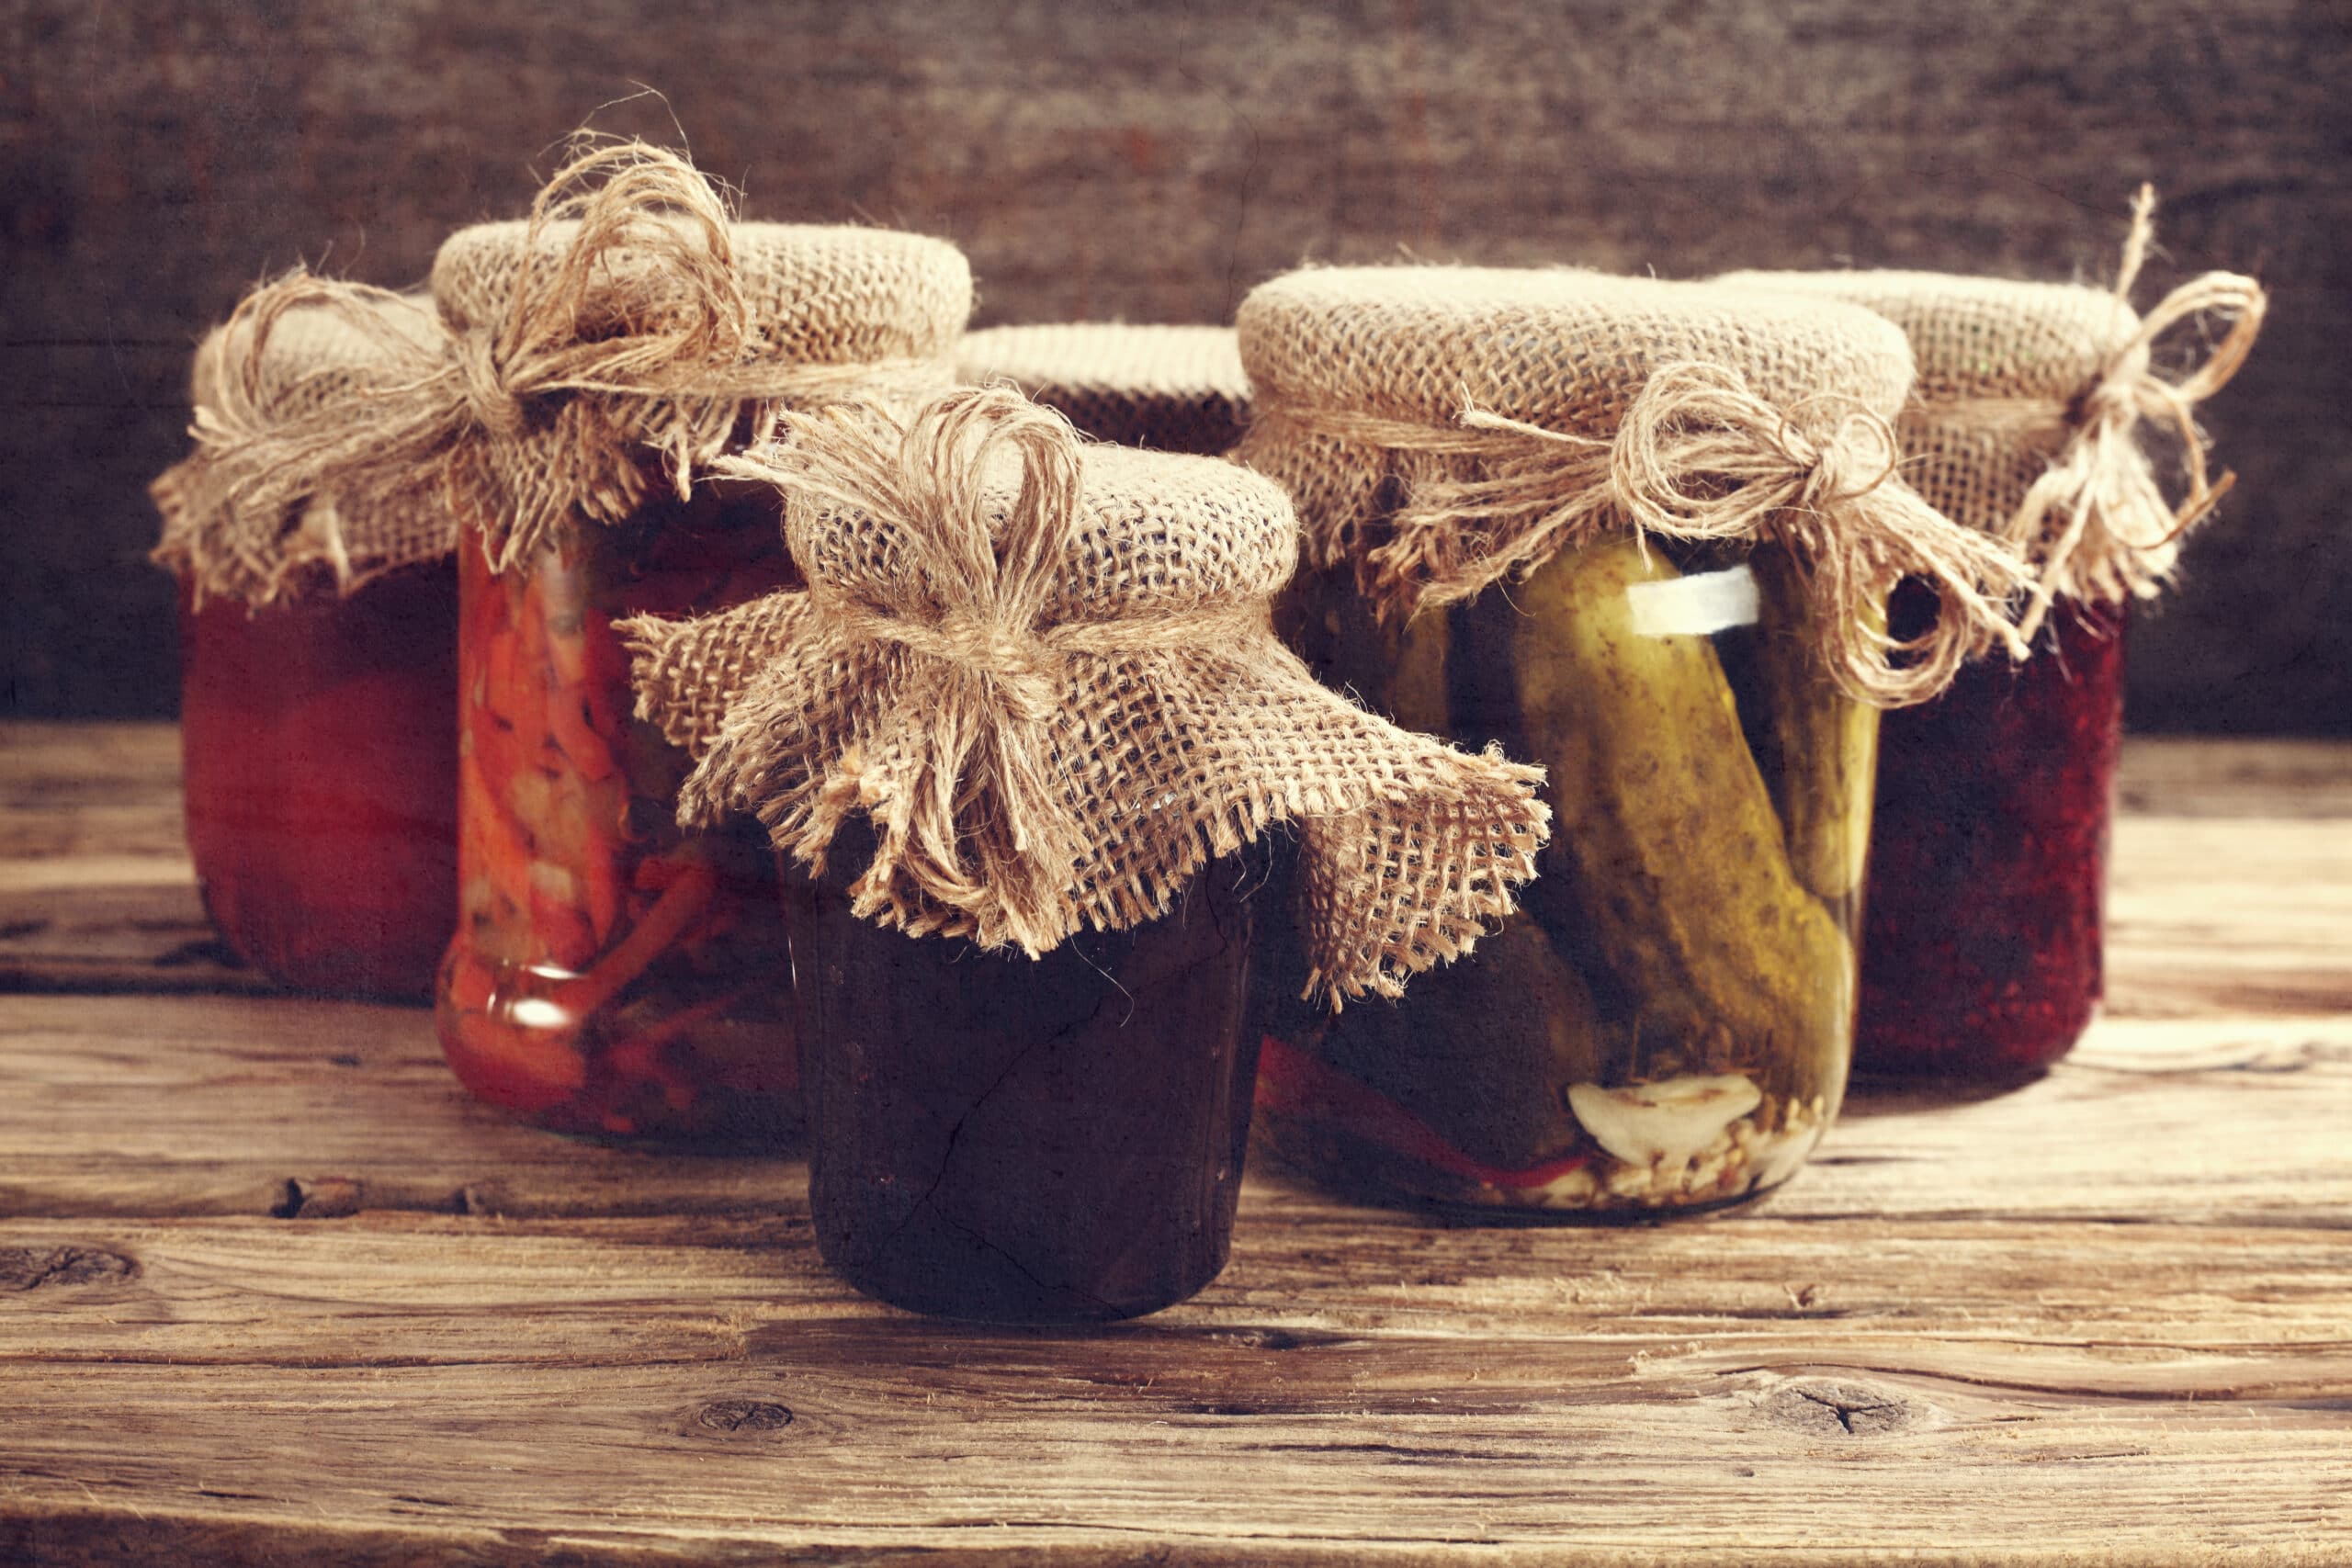 How to Spice up Your Life With Thrifted Mason Jars - Finding Your Good